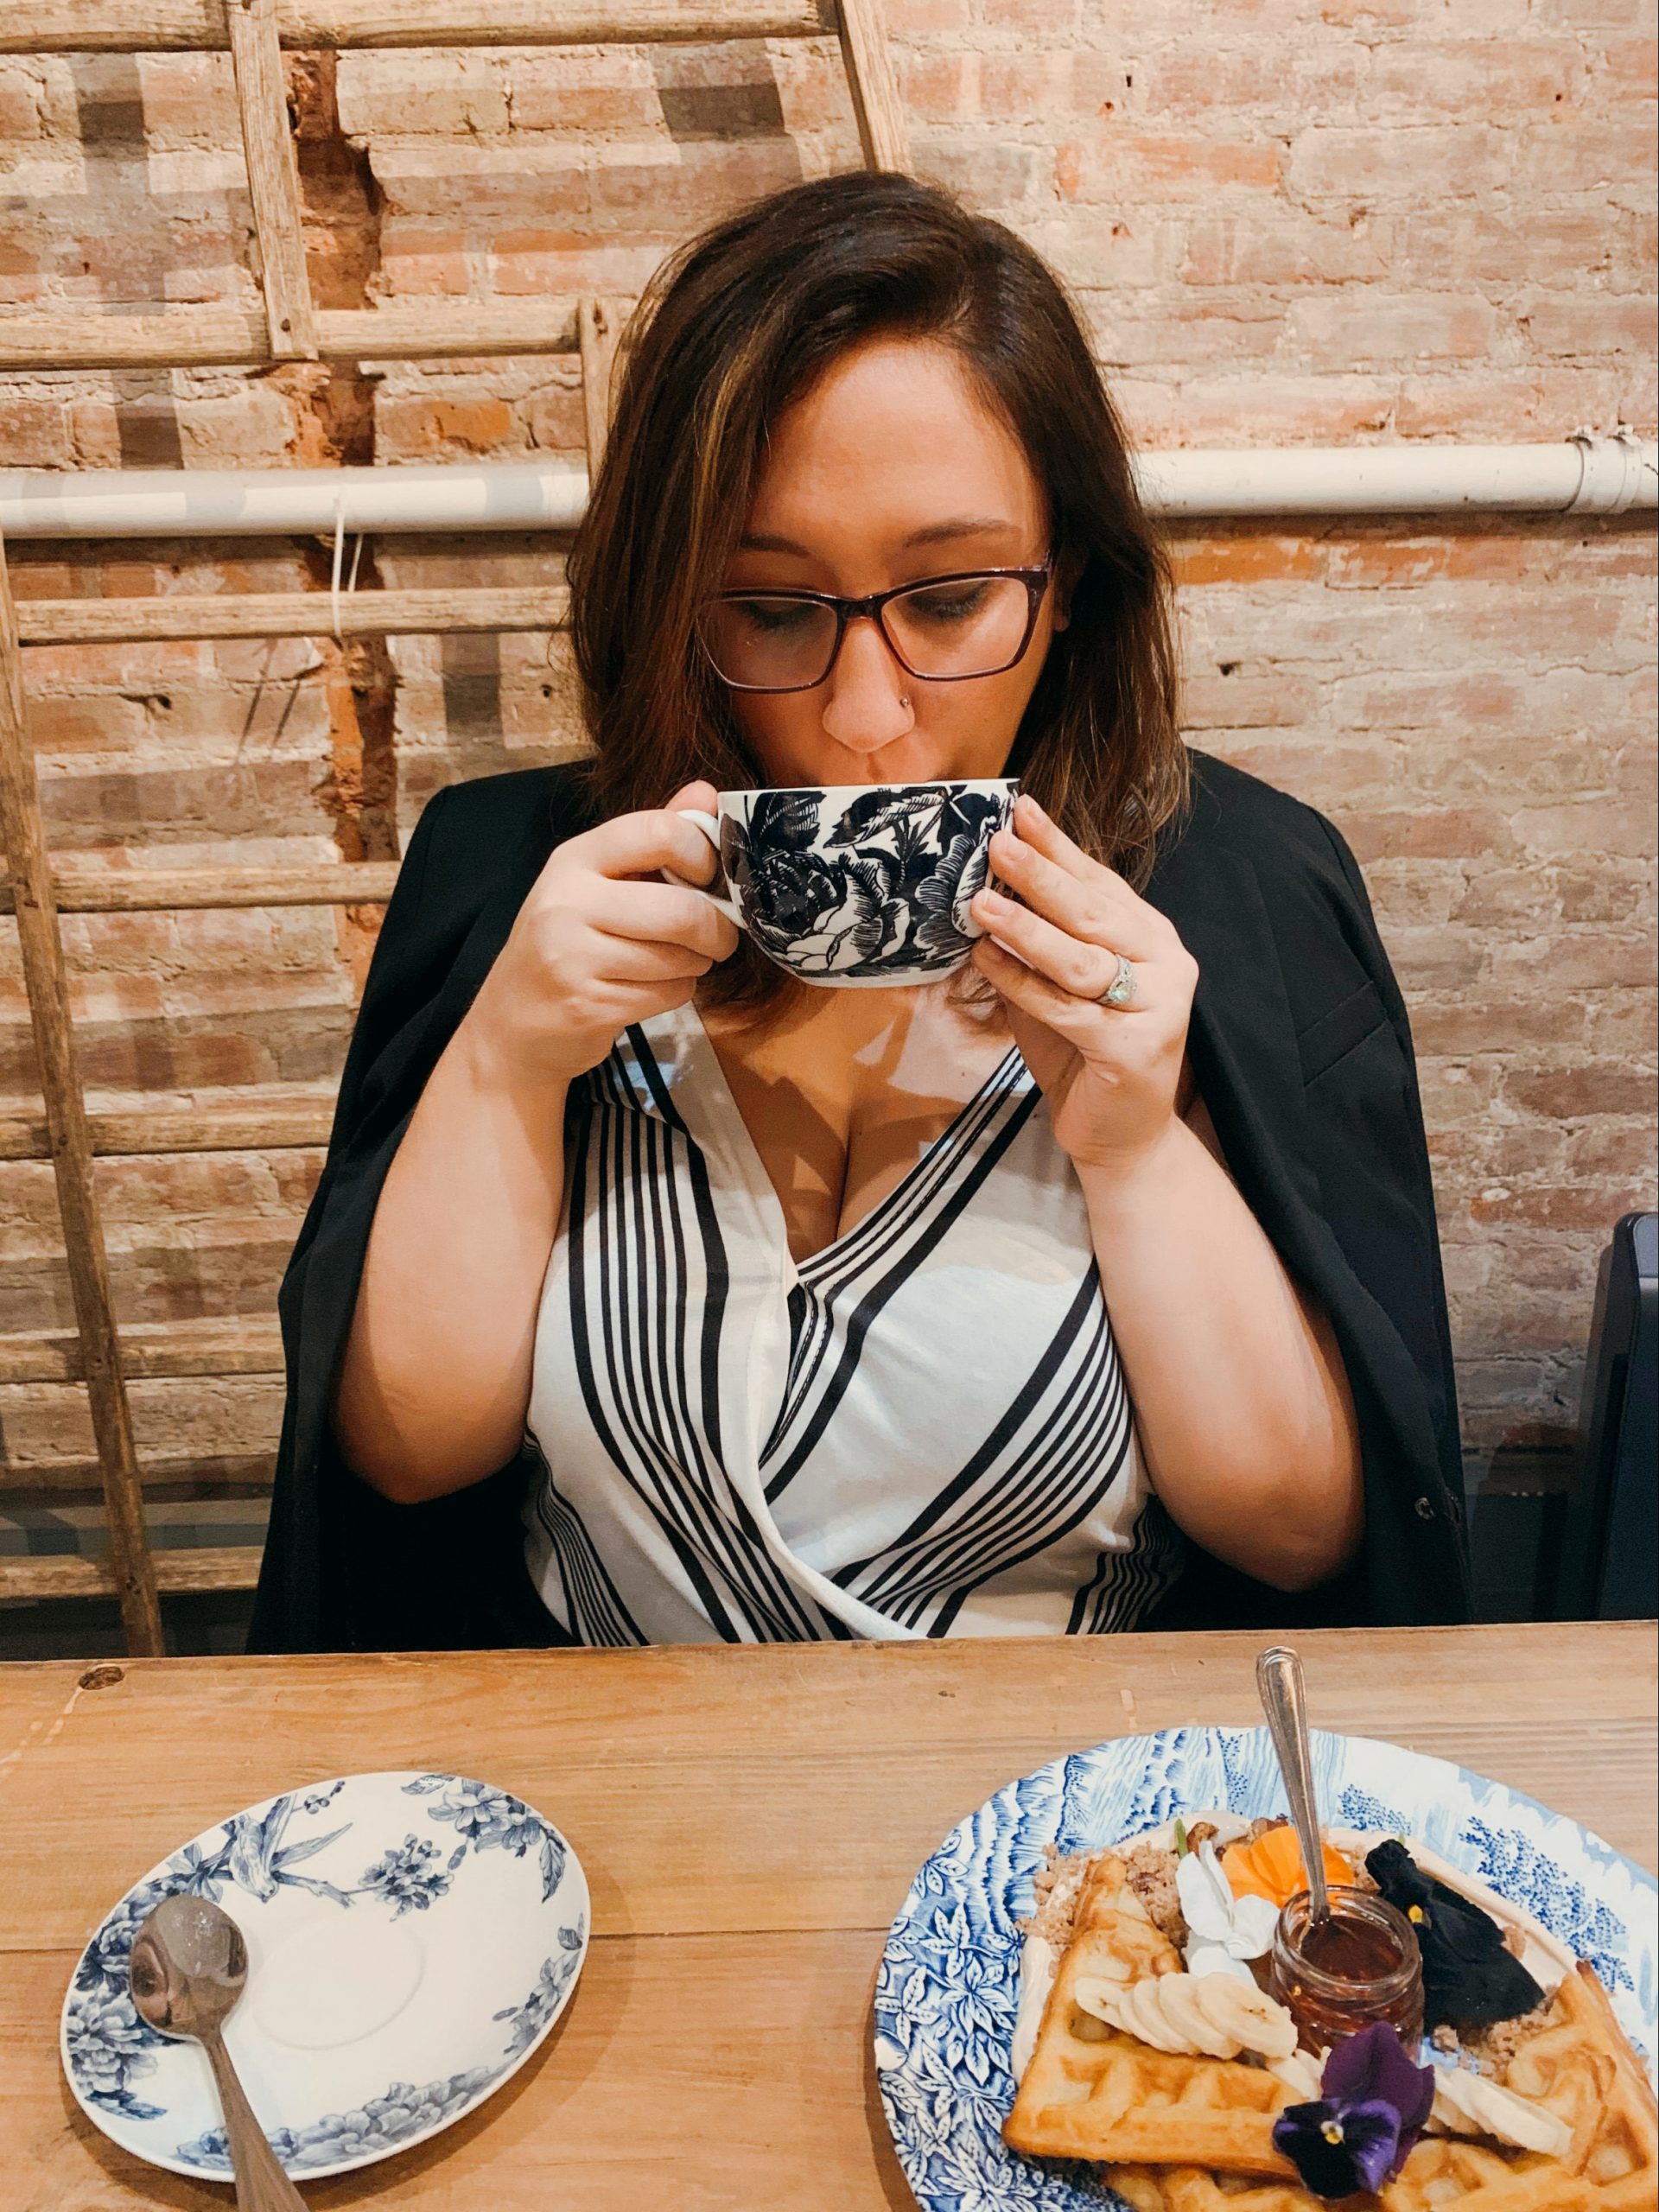 A woman drinks from a cup of coffee